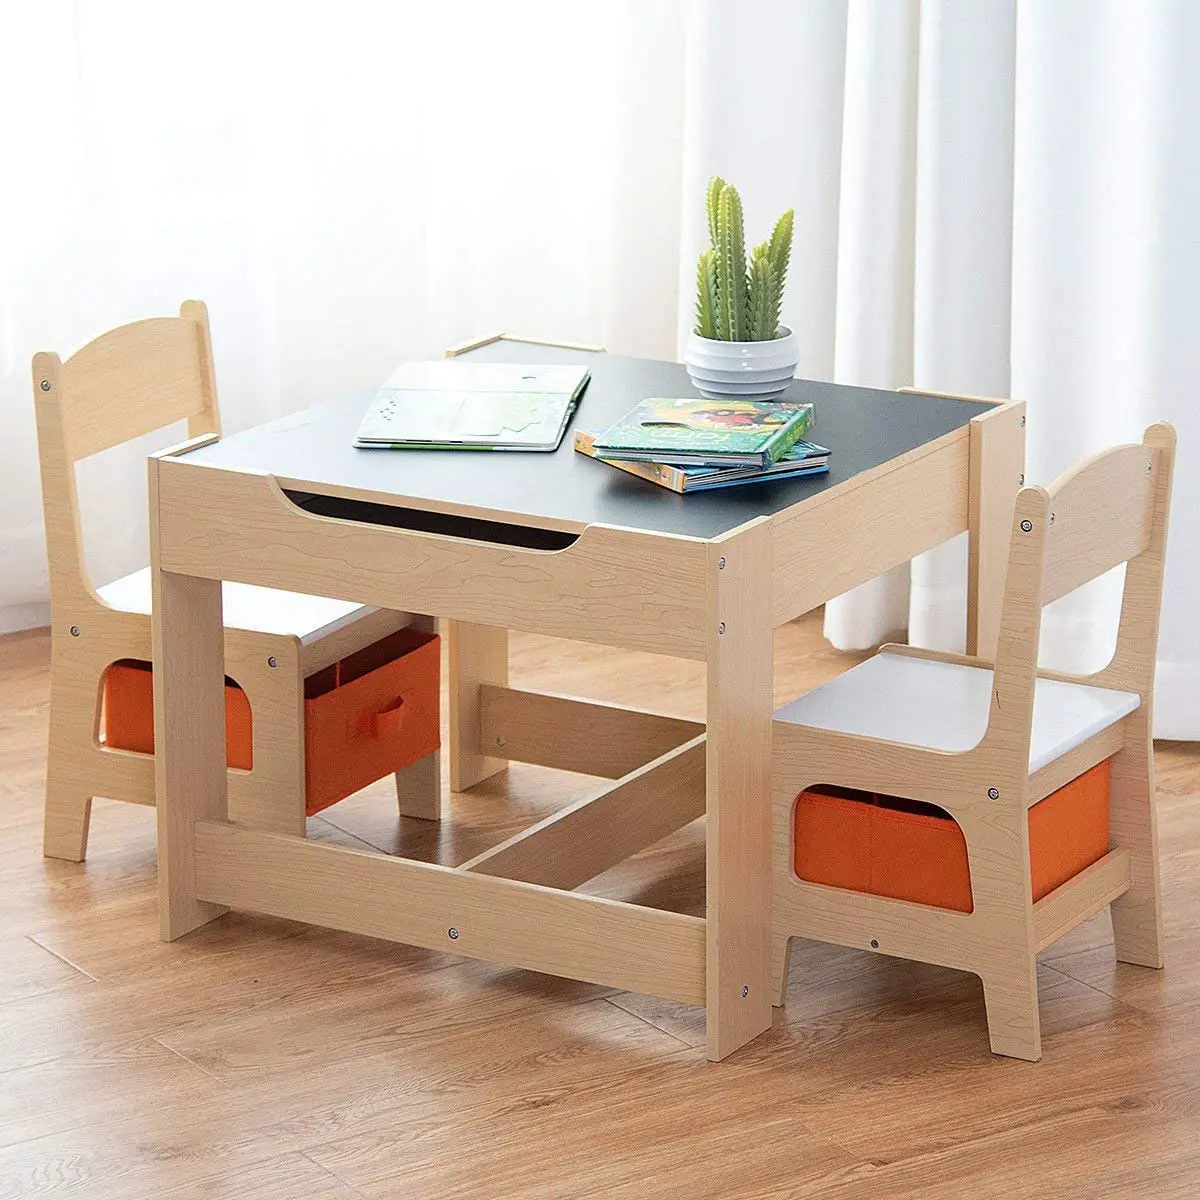 wooden table set